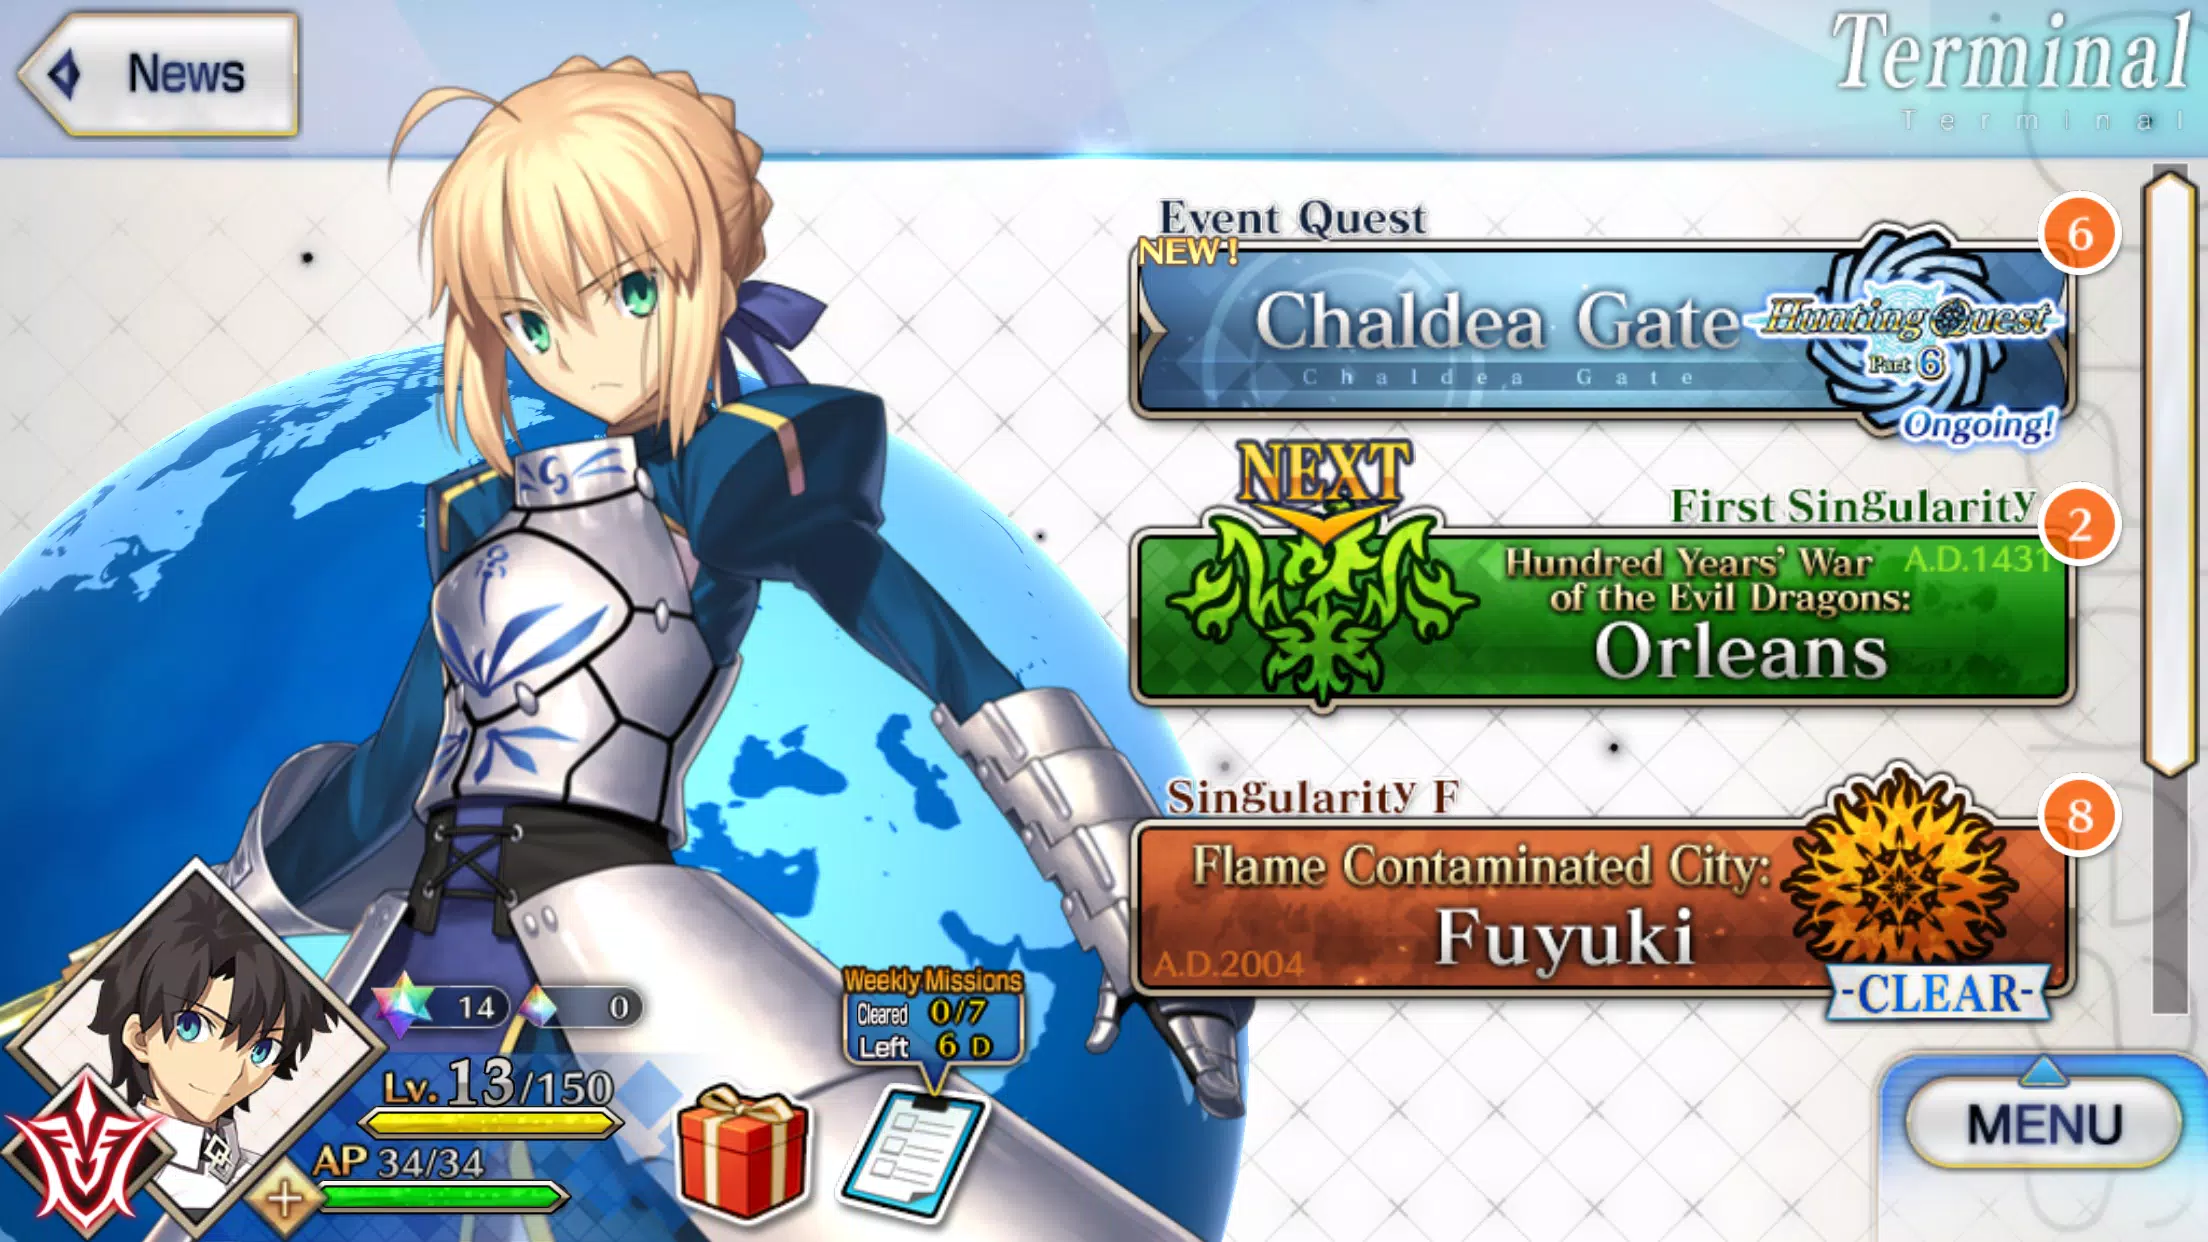 Fate/Grand Order (English) for Android - APK Download